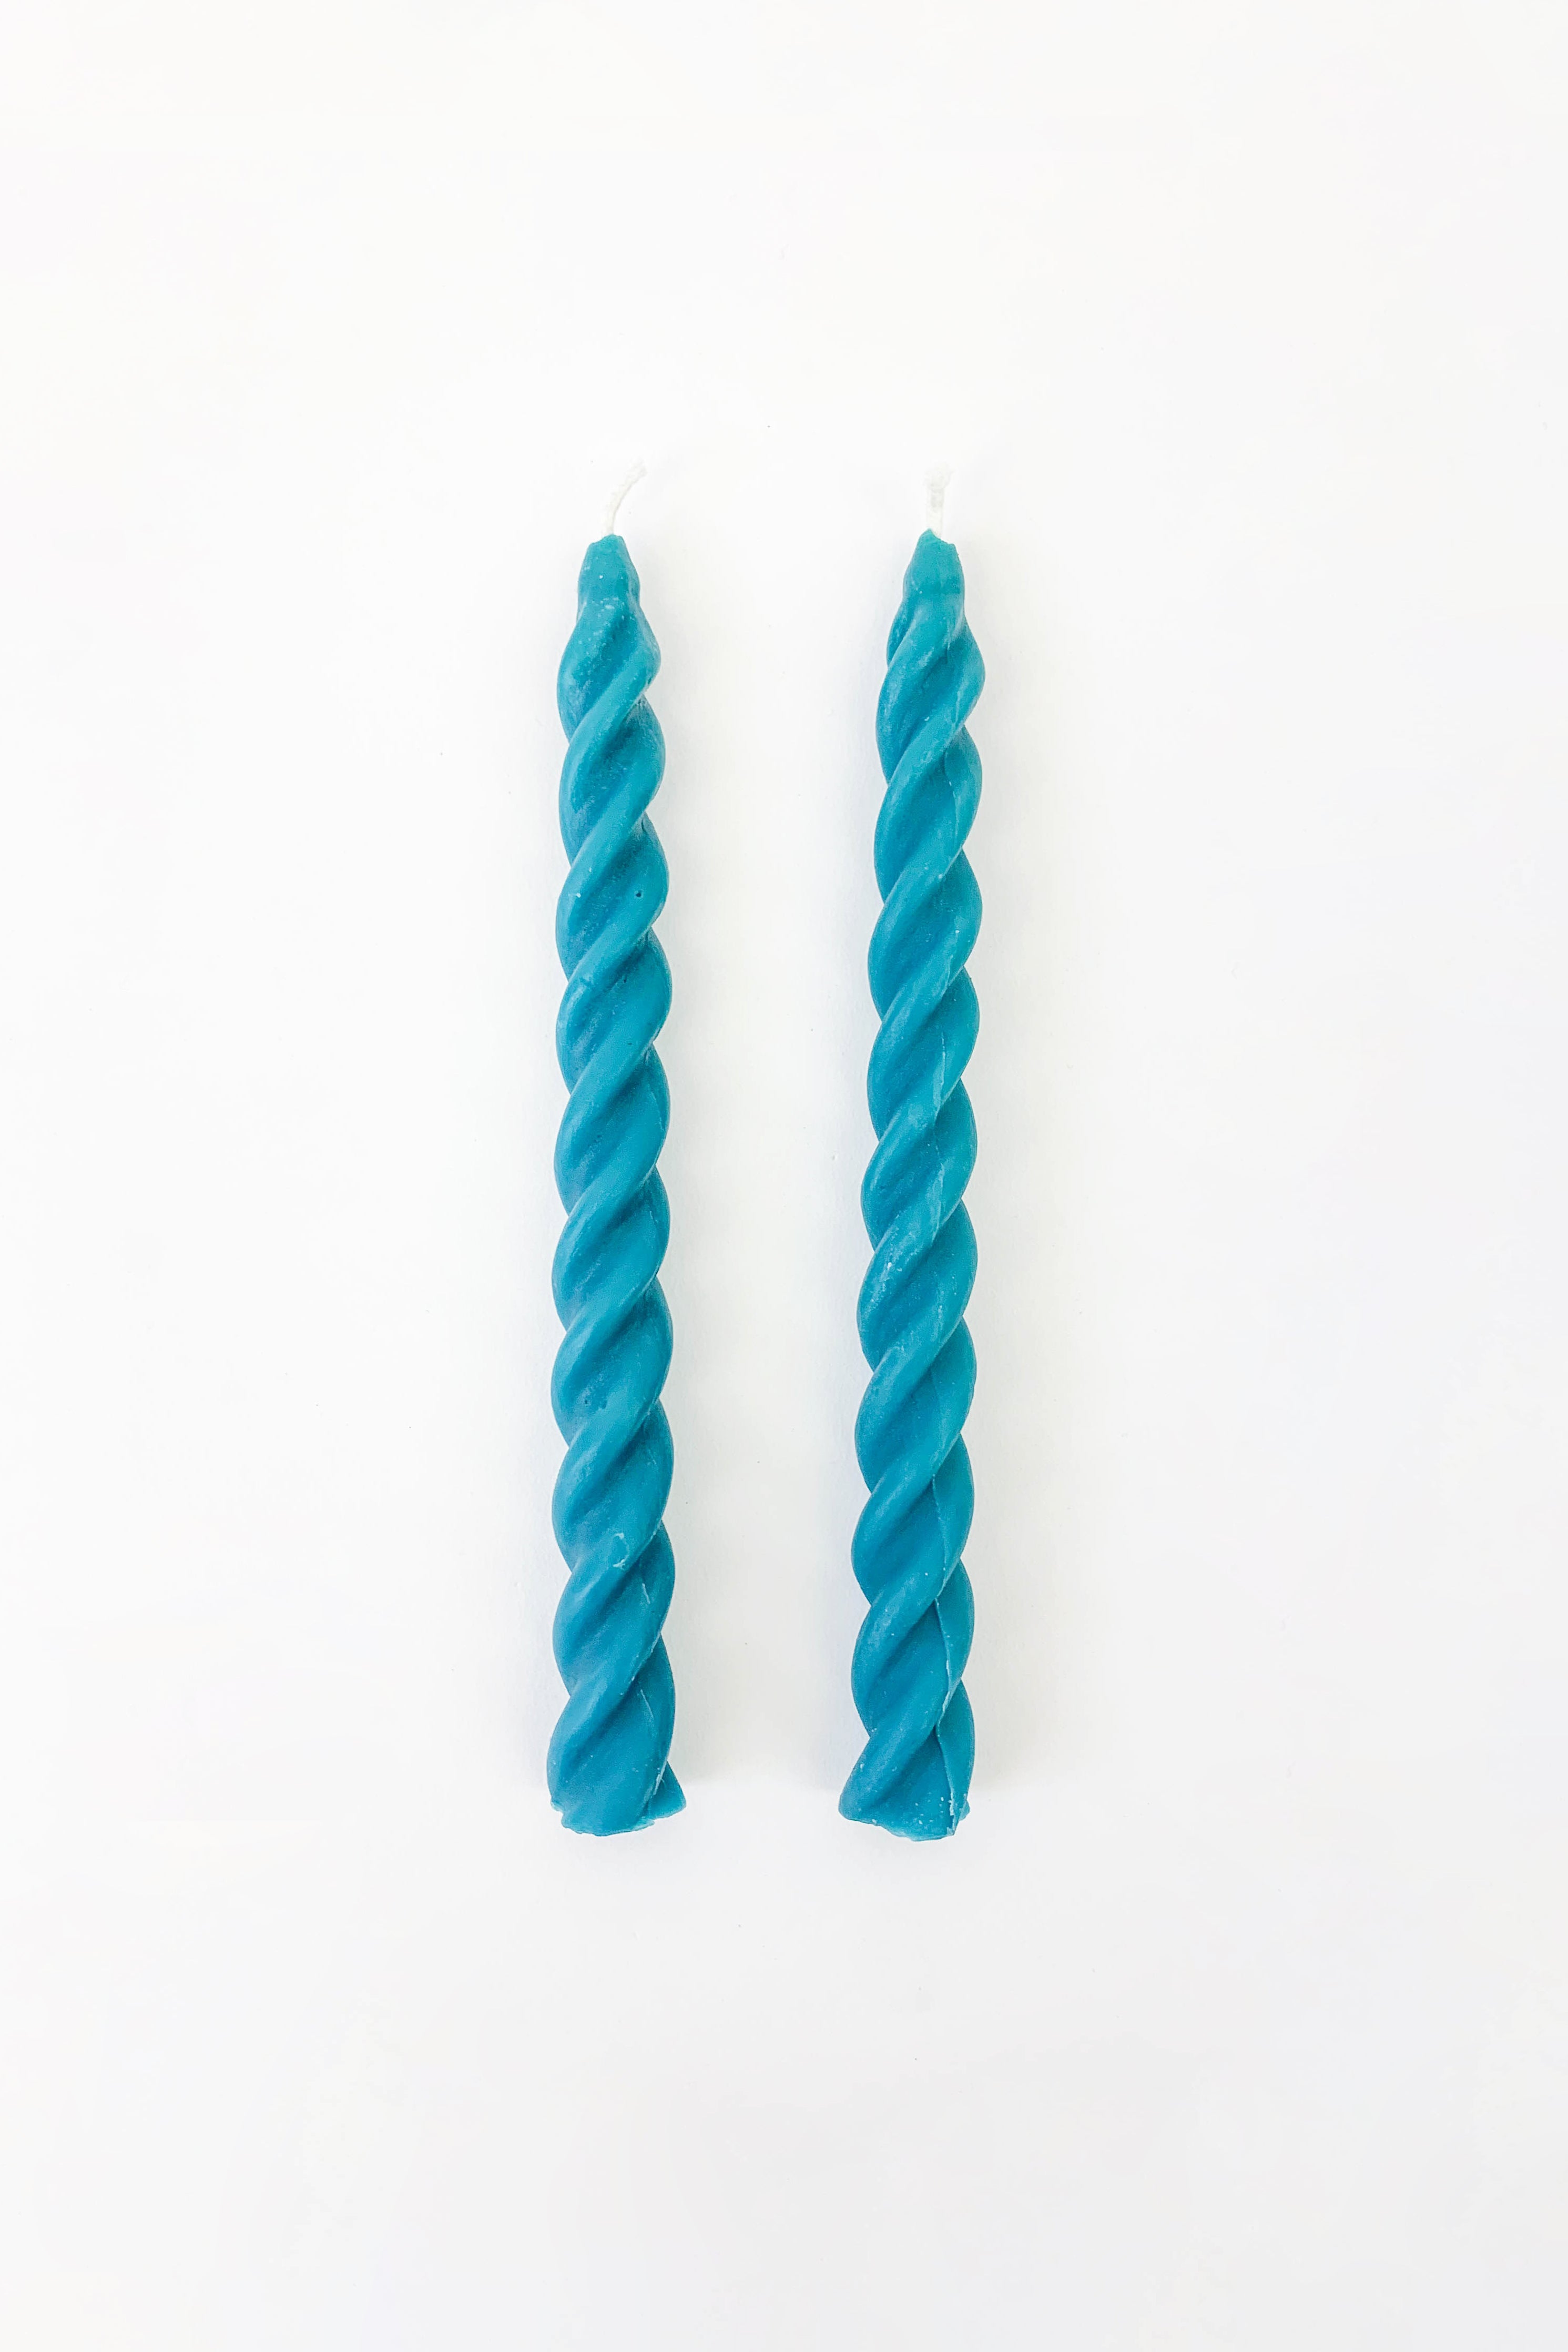 Twisted Taper Candle in Turquoise